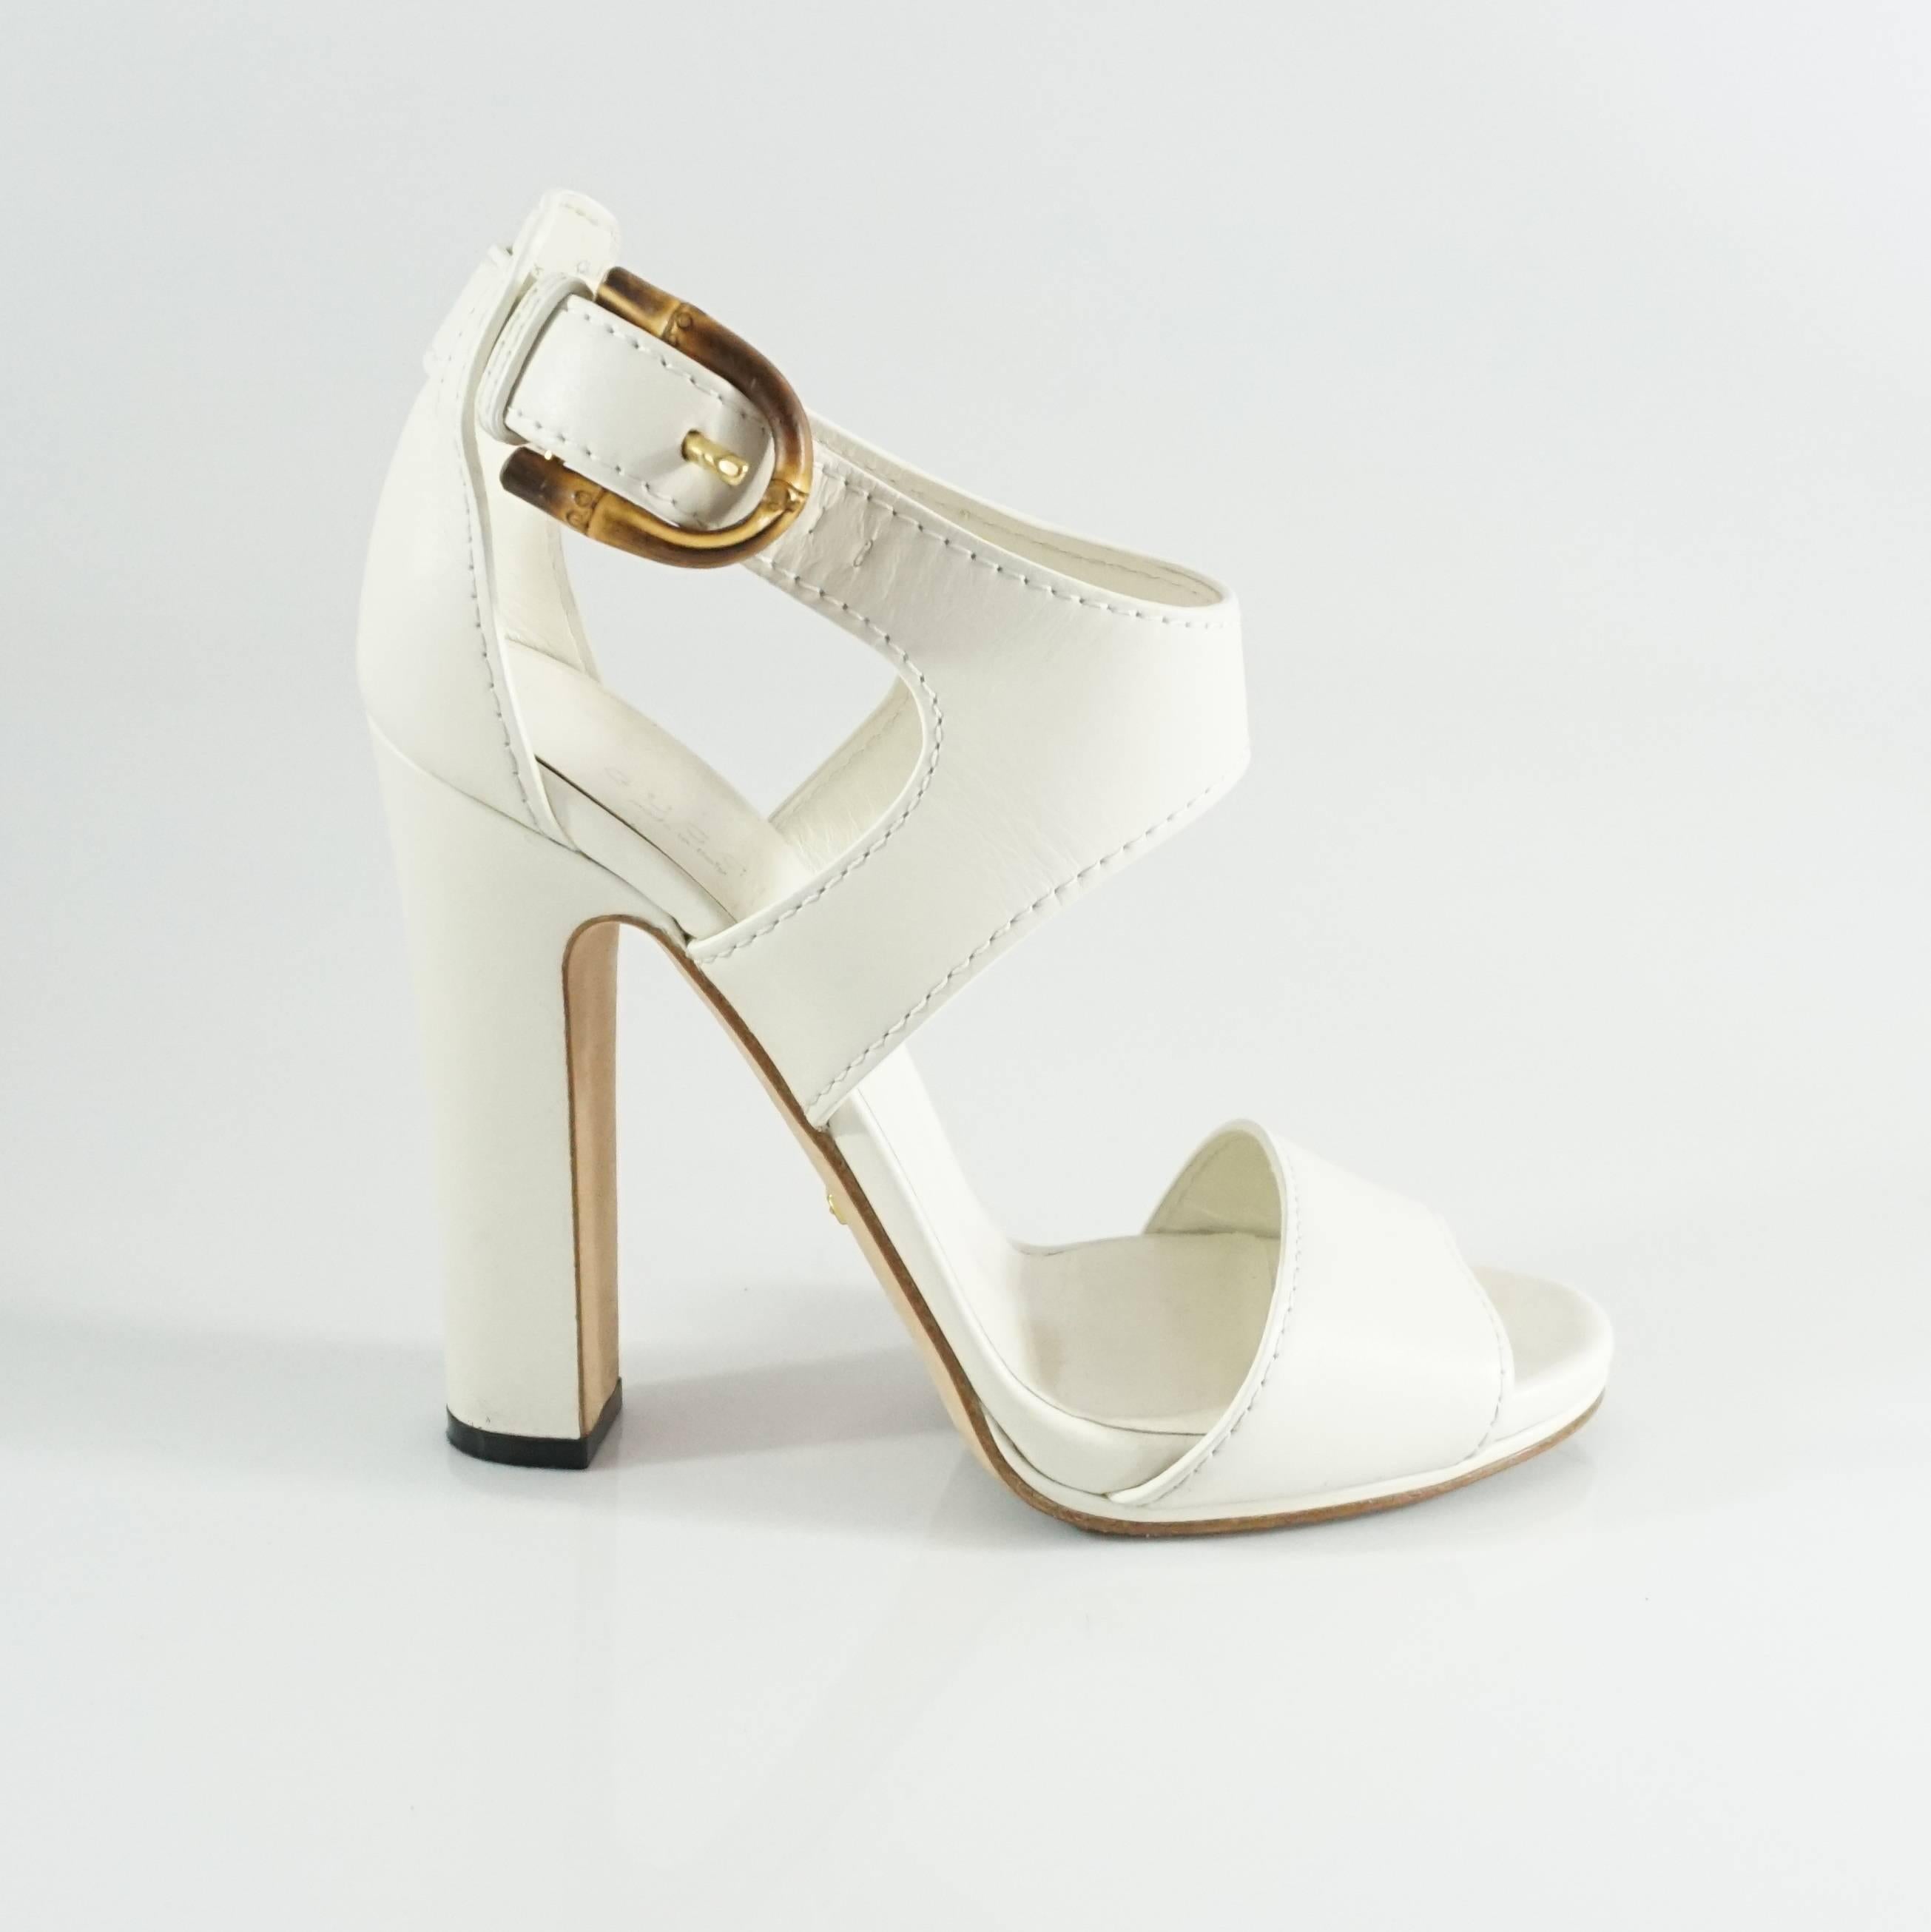 These Gucci white leather heels are strappy and open-toe. They have a cutout top and bamboo buckle closure. The heels are in excellent condition with some wear on the bottom and minor leather wear. Size 38.

Heel Height: 4.75